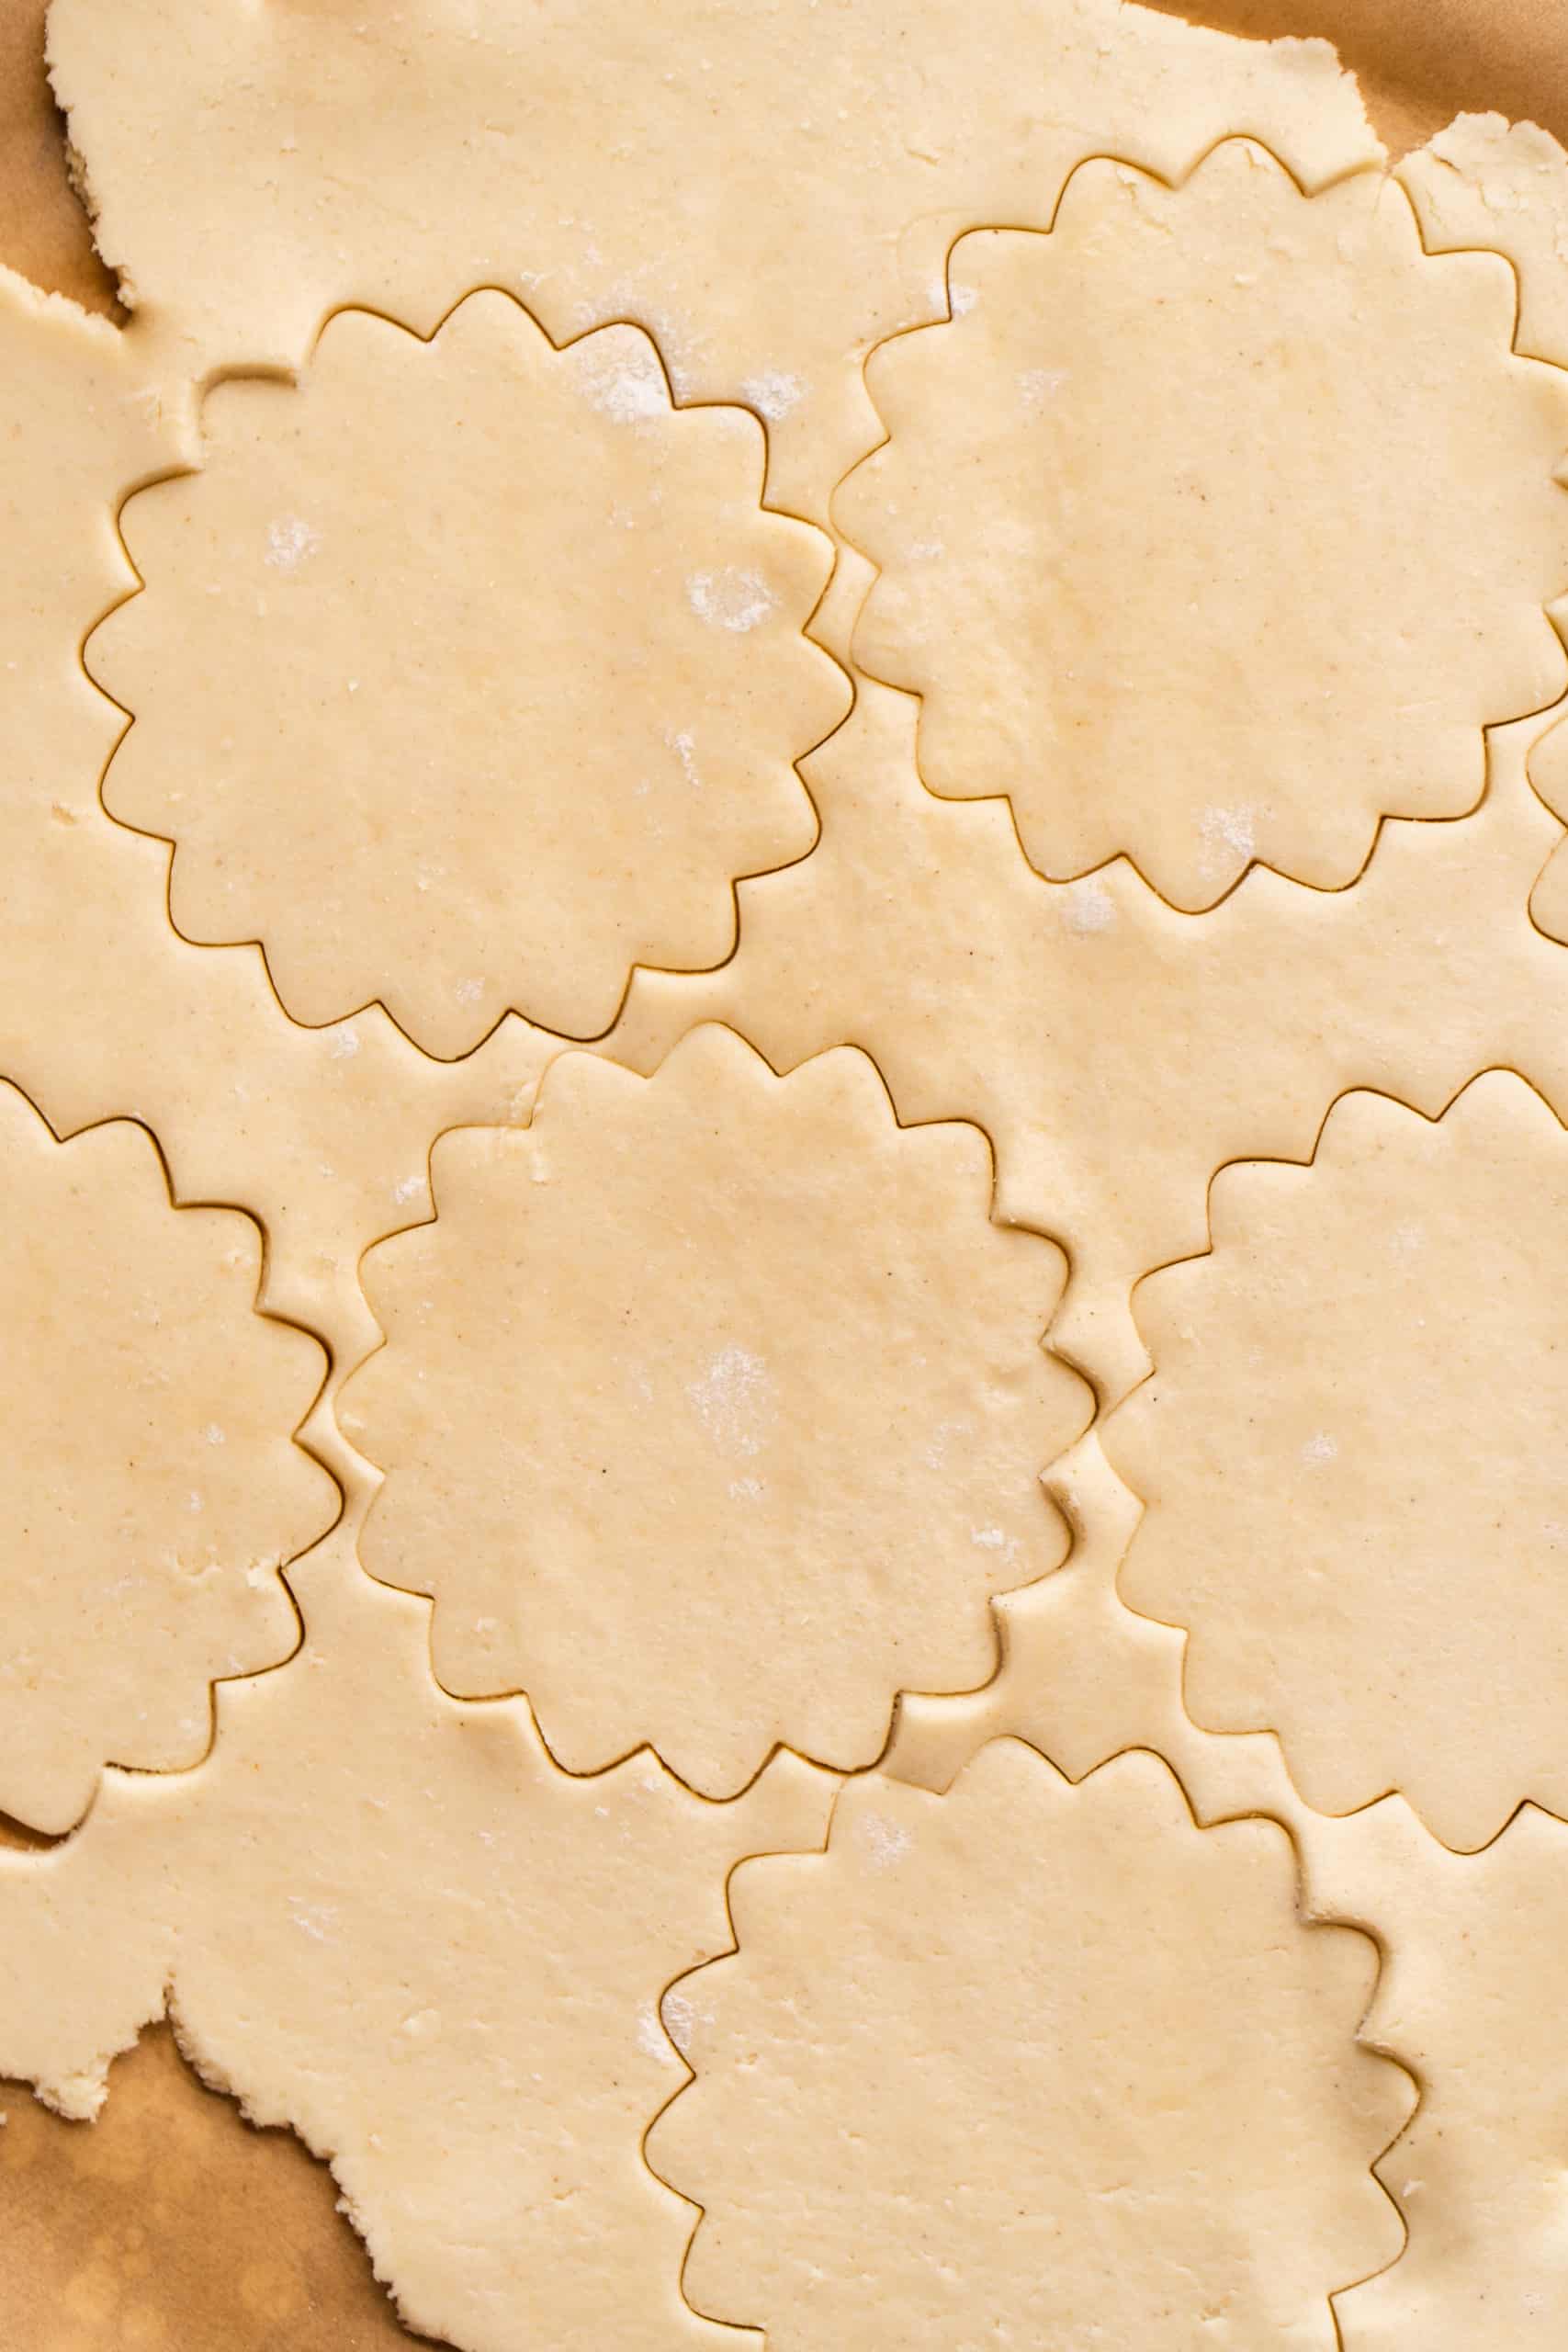 Pie dough rolled out with a scolloped cookie cutter cutting shapes.